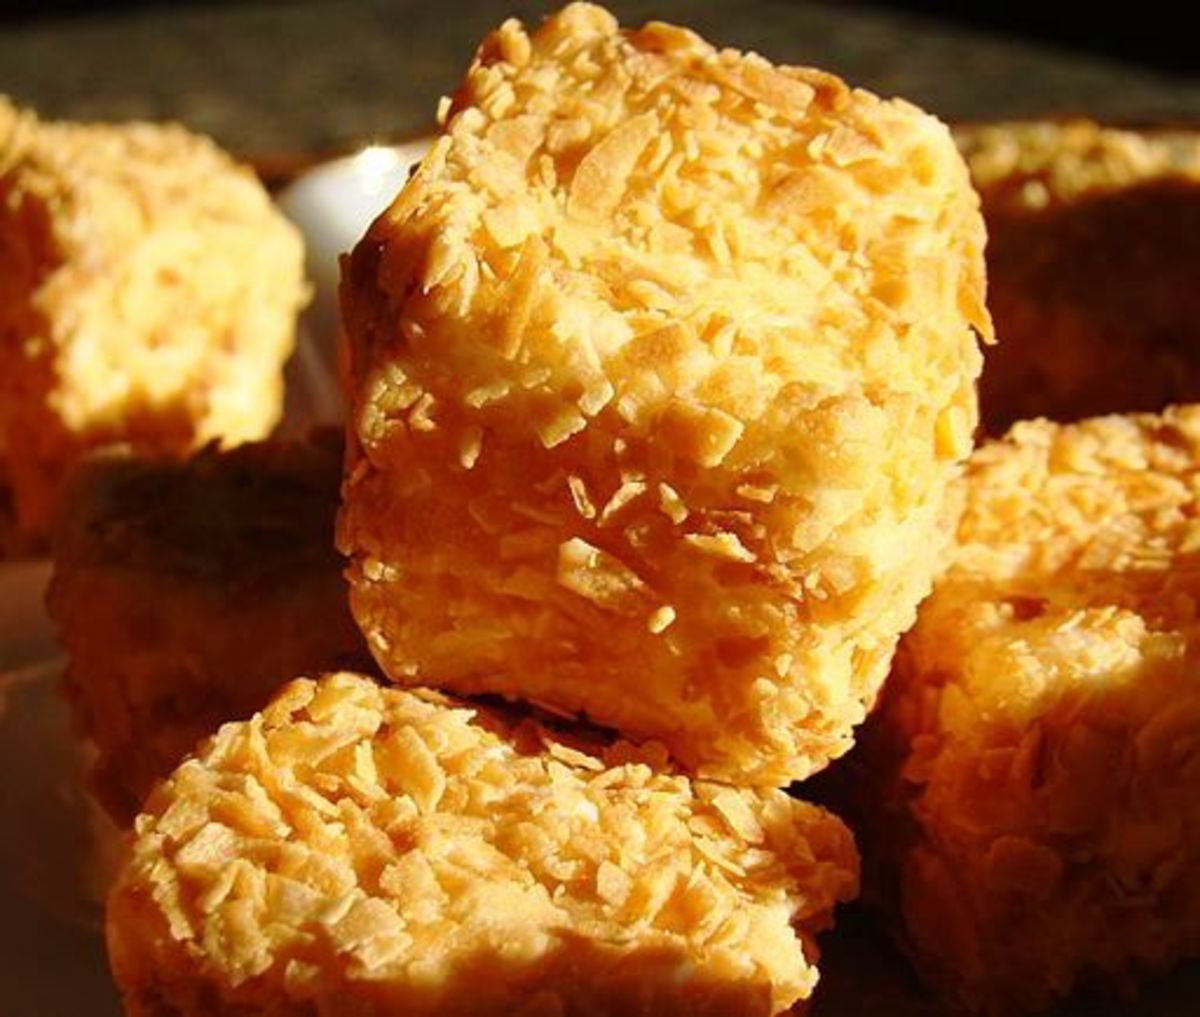 A favorite marshmallow treat: marshmallows coated with toasted coconut